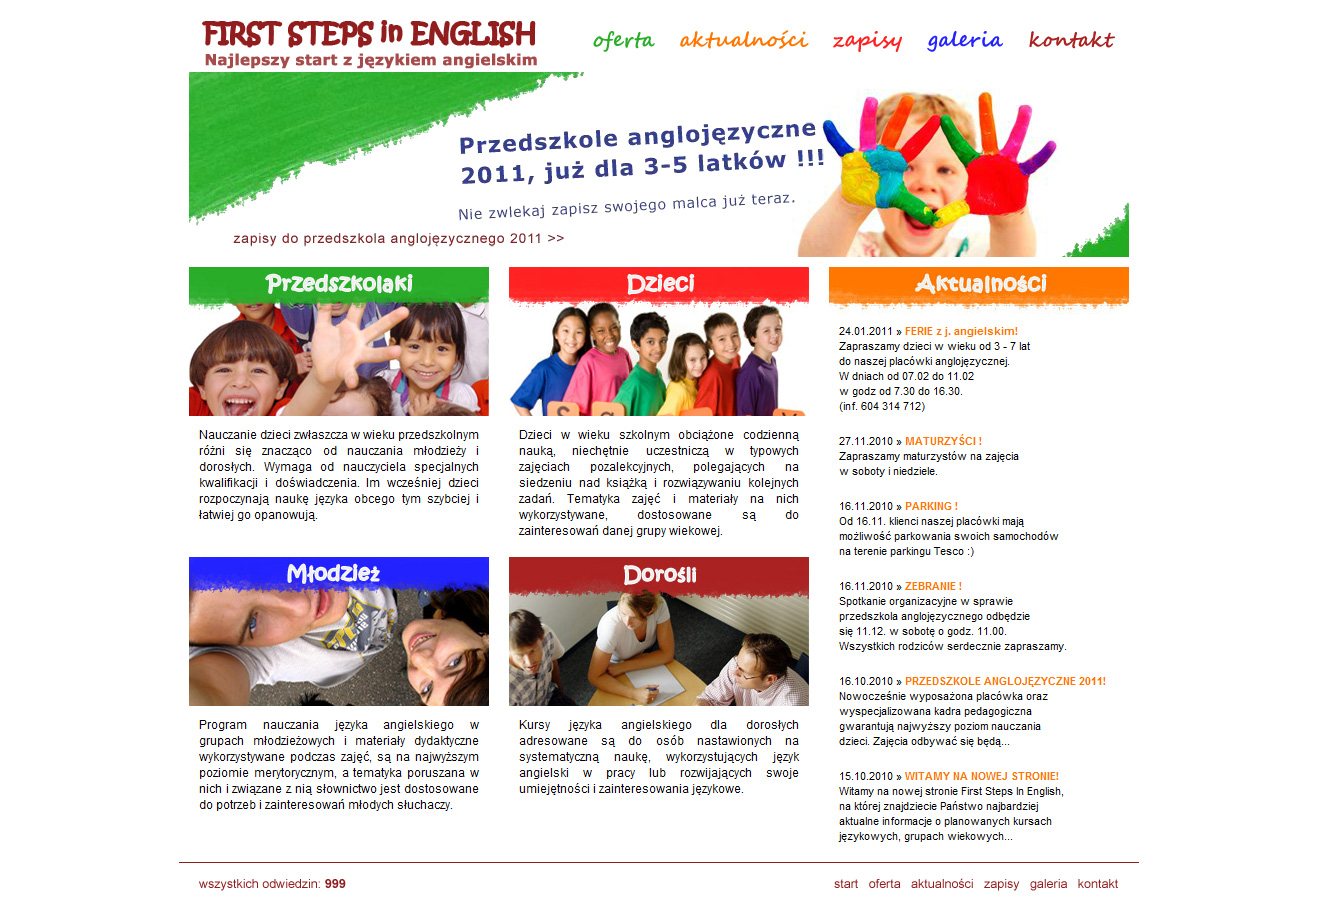 First Step in English website